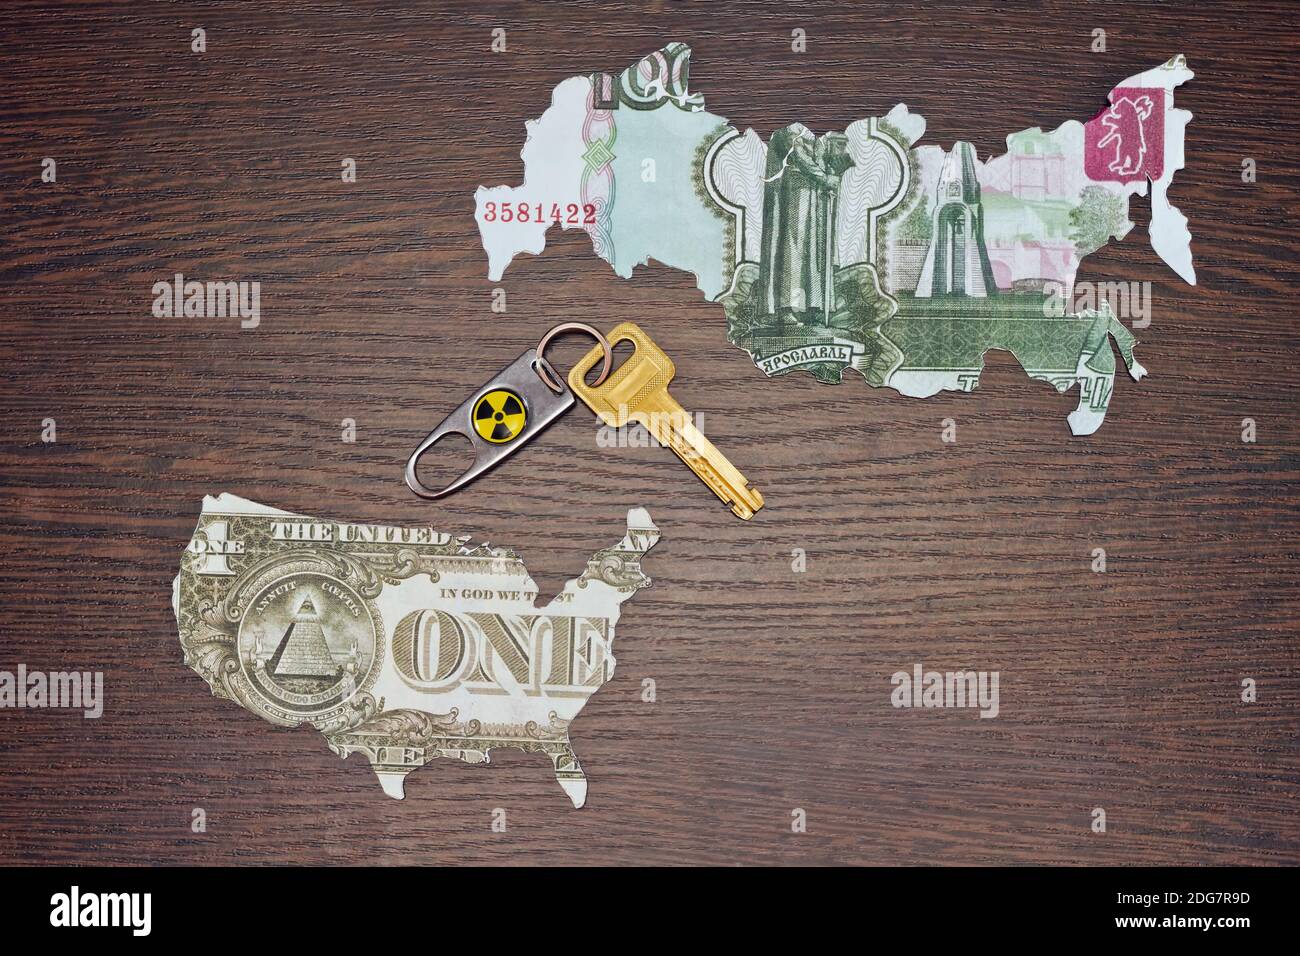 Confrontation between the economies of the two superpowers leads to nuclear war Stock Photo